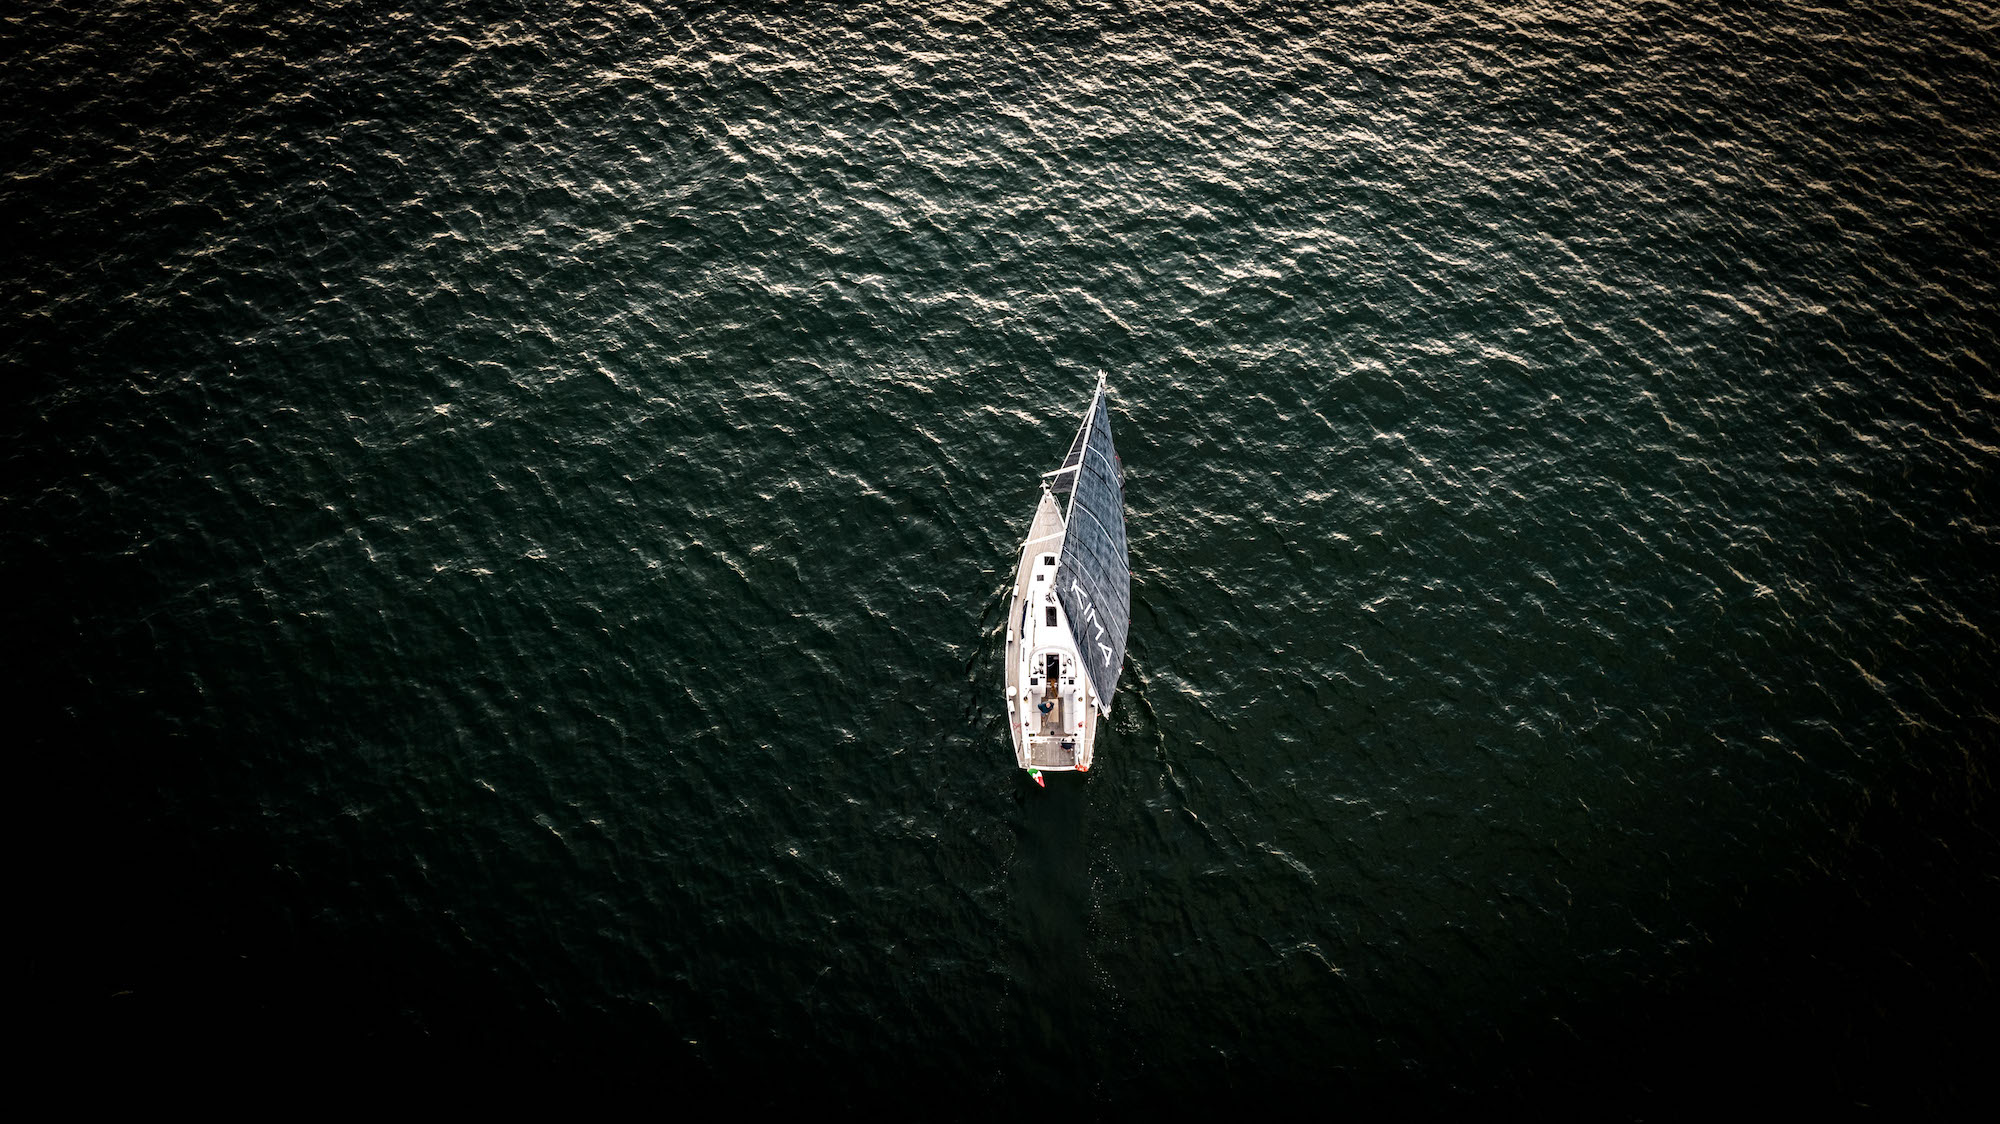 A drone view of a sailboat during the sunset in Sottomarina, Chioggia, Italy, on May 30, 2021